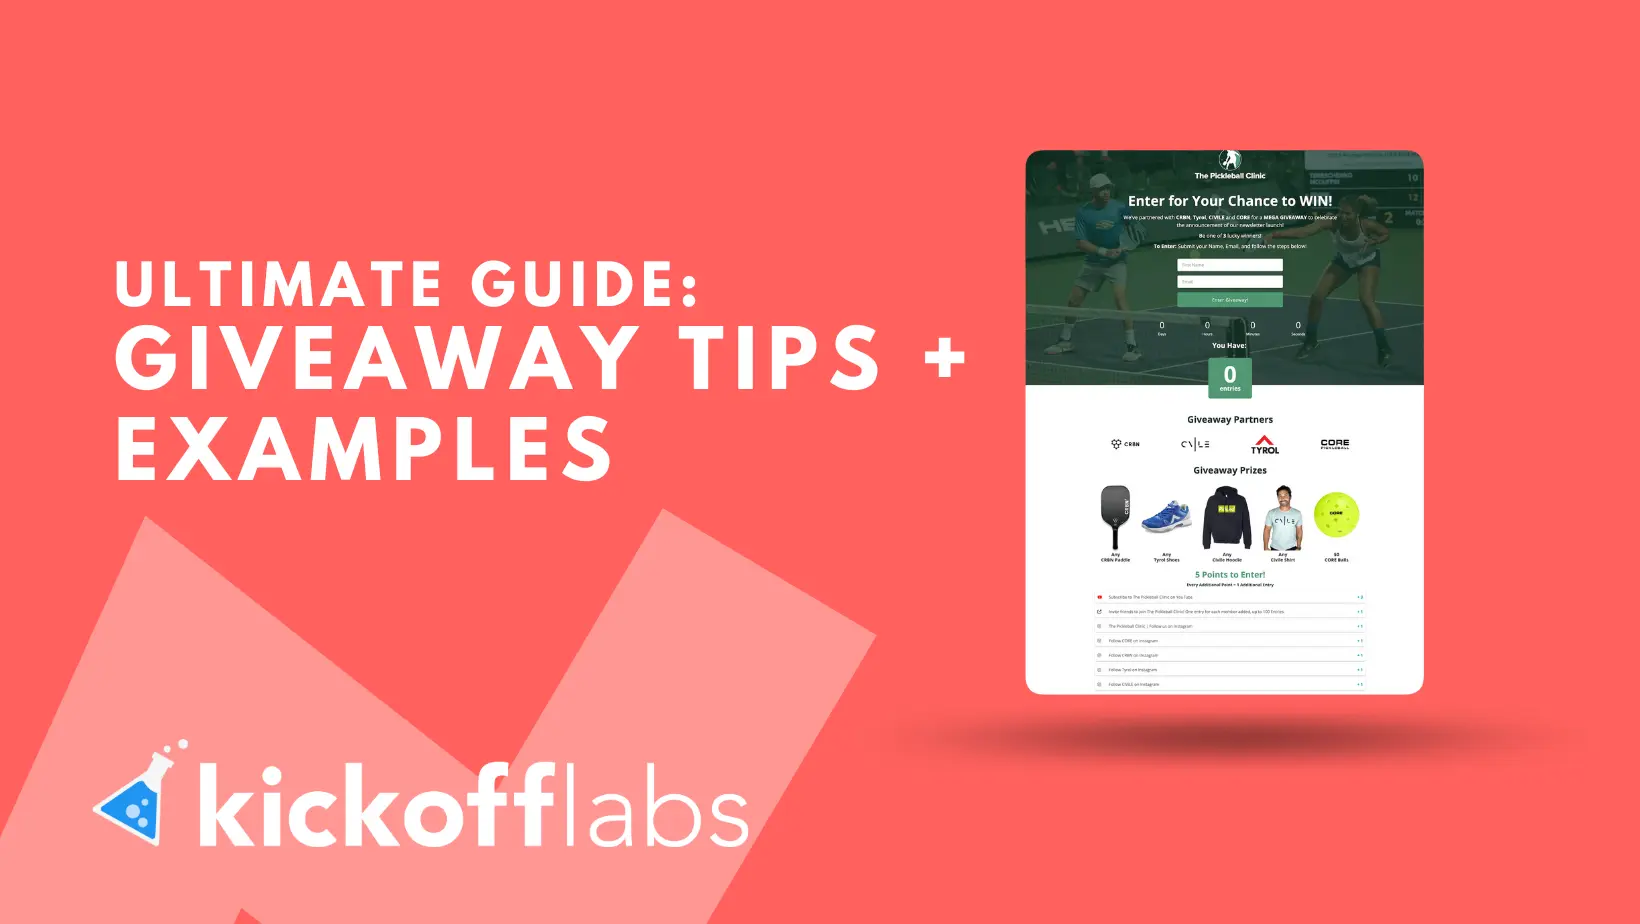 6 Tips for Running a Successful Giveaway Based on Real Examples